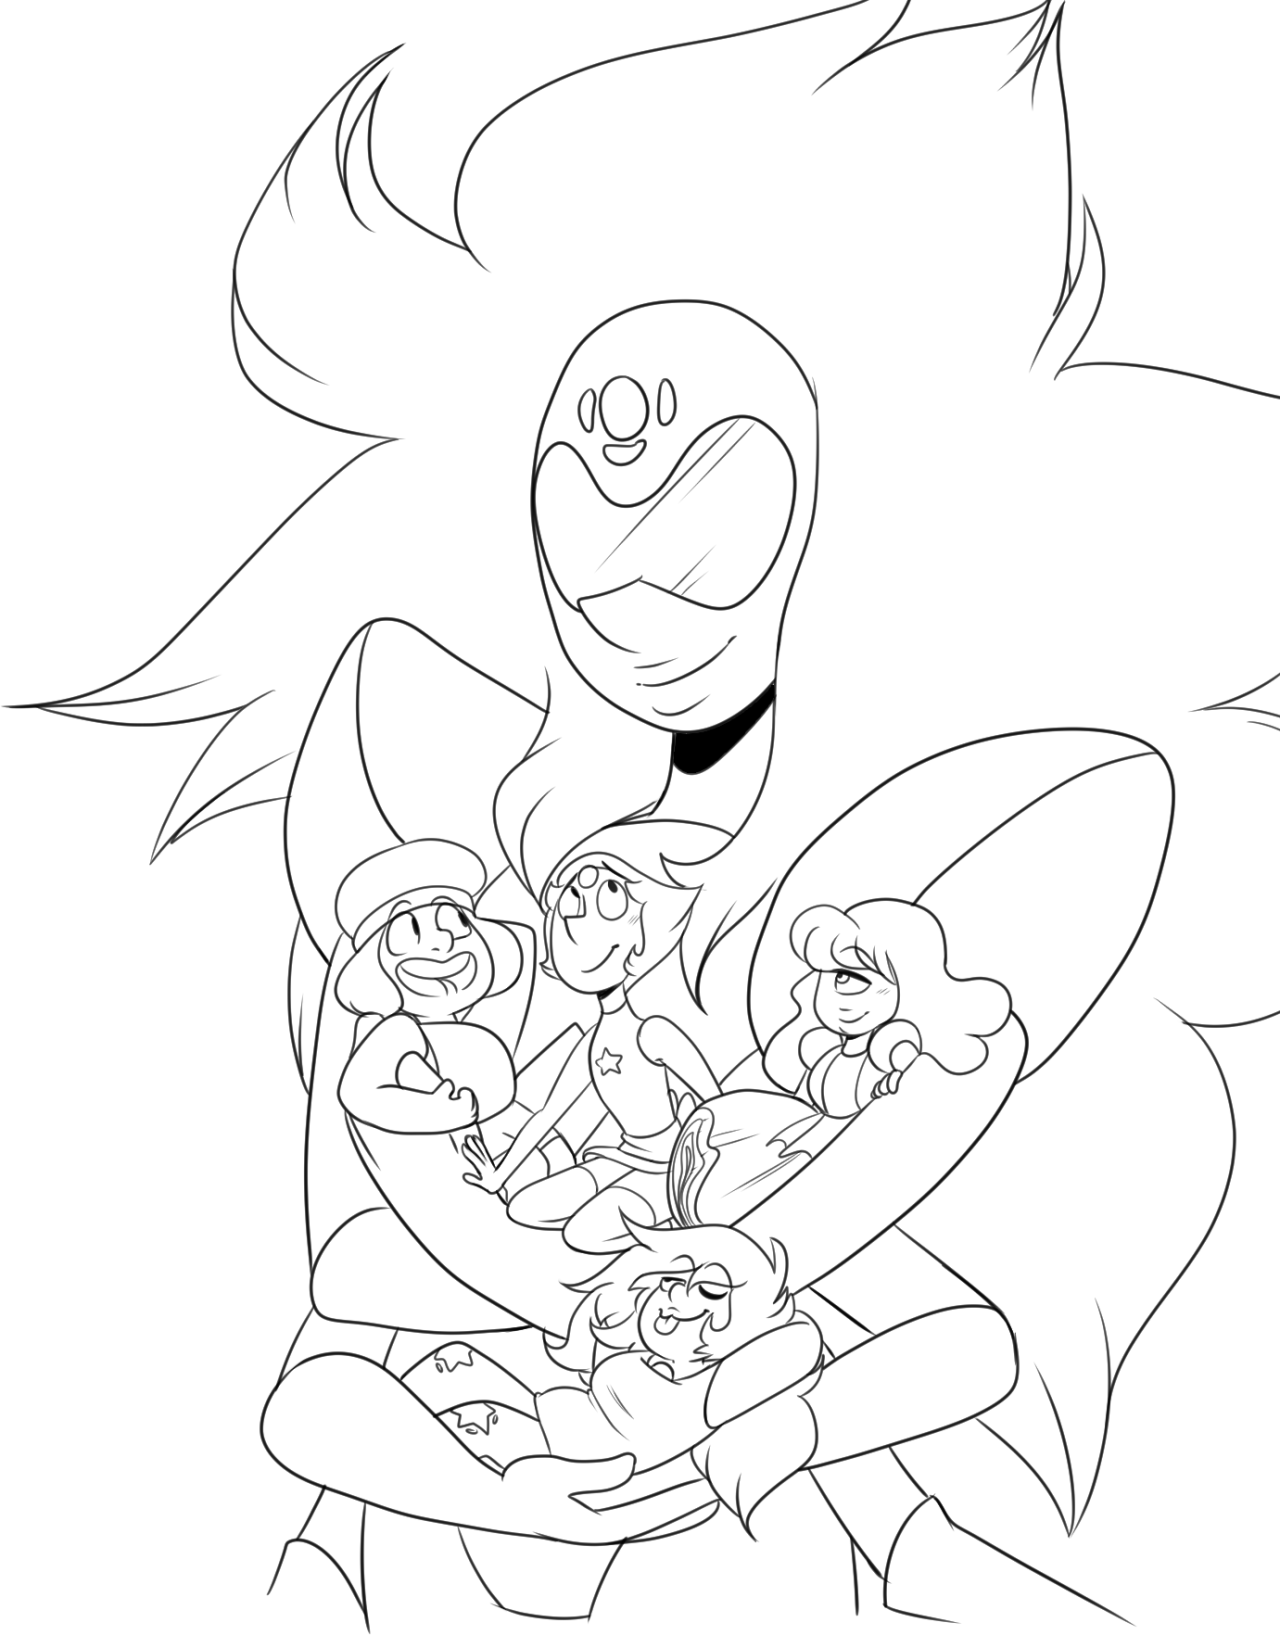 Anonymous said: Prompt: Alexandrite hugging all her components... Answer: ALEXANDRITE GOT TOO MANY GOTTDANG ARMS.